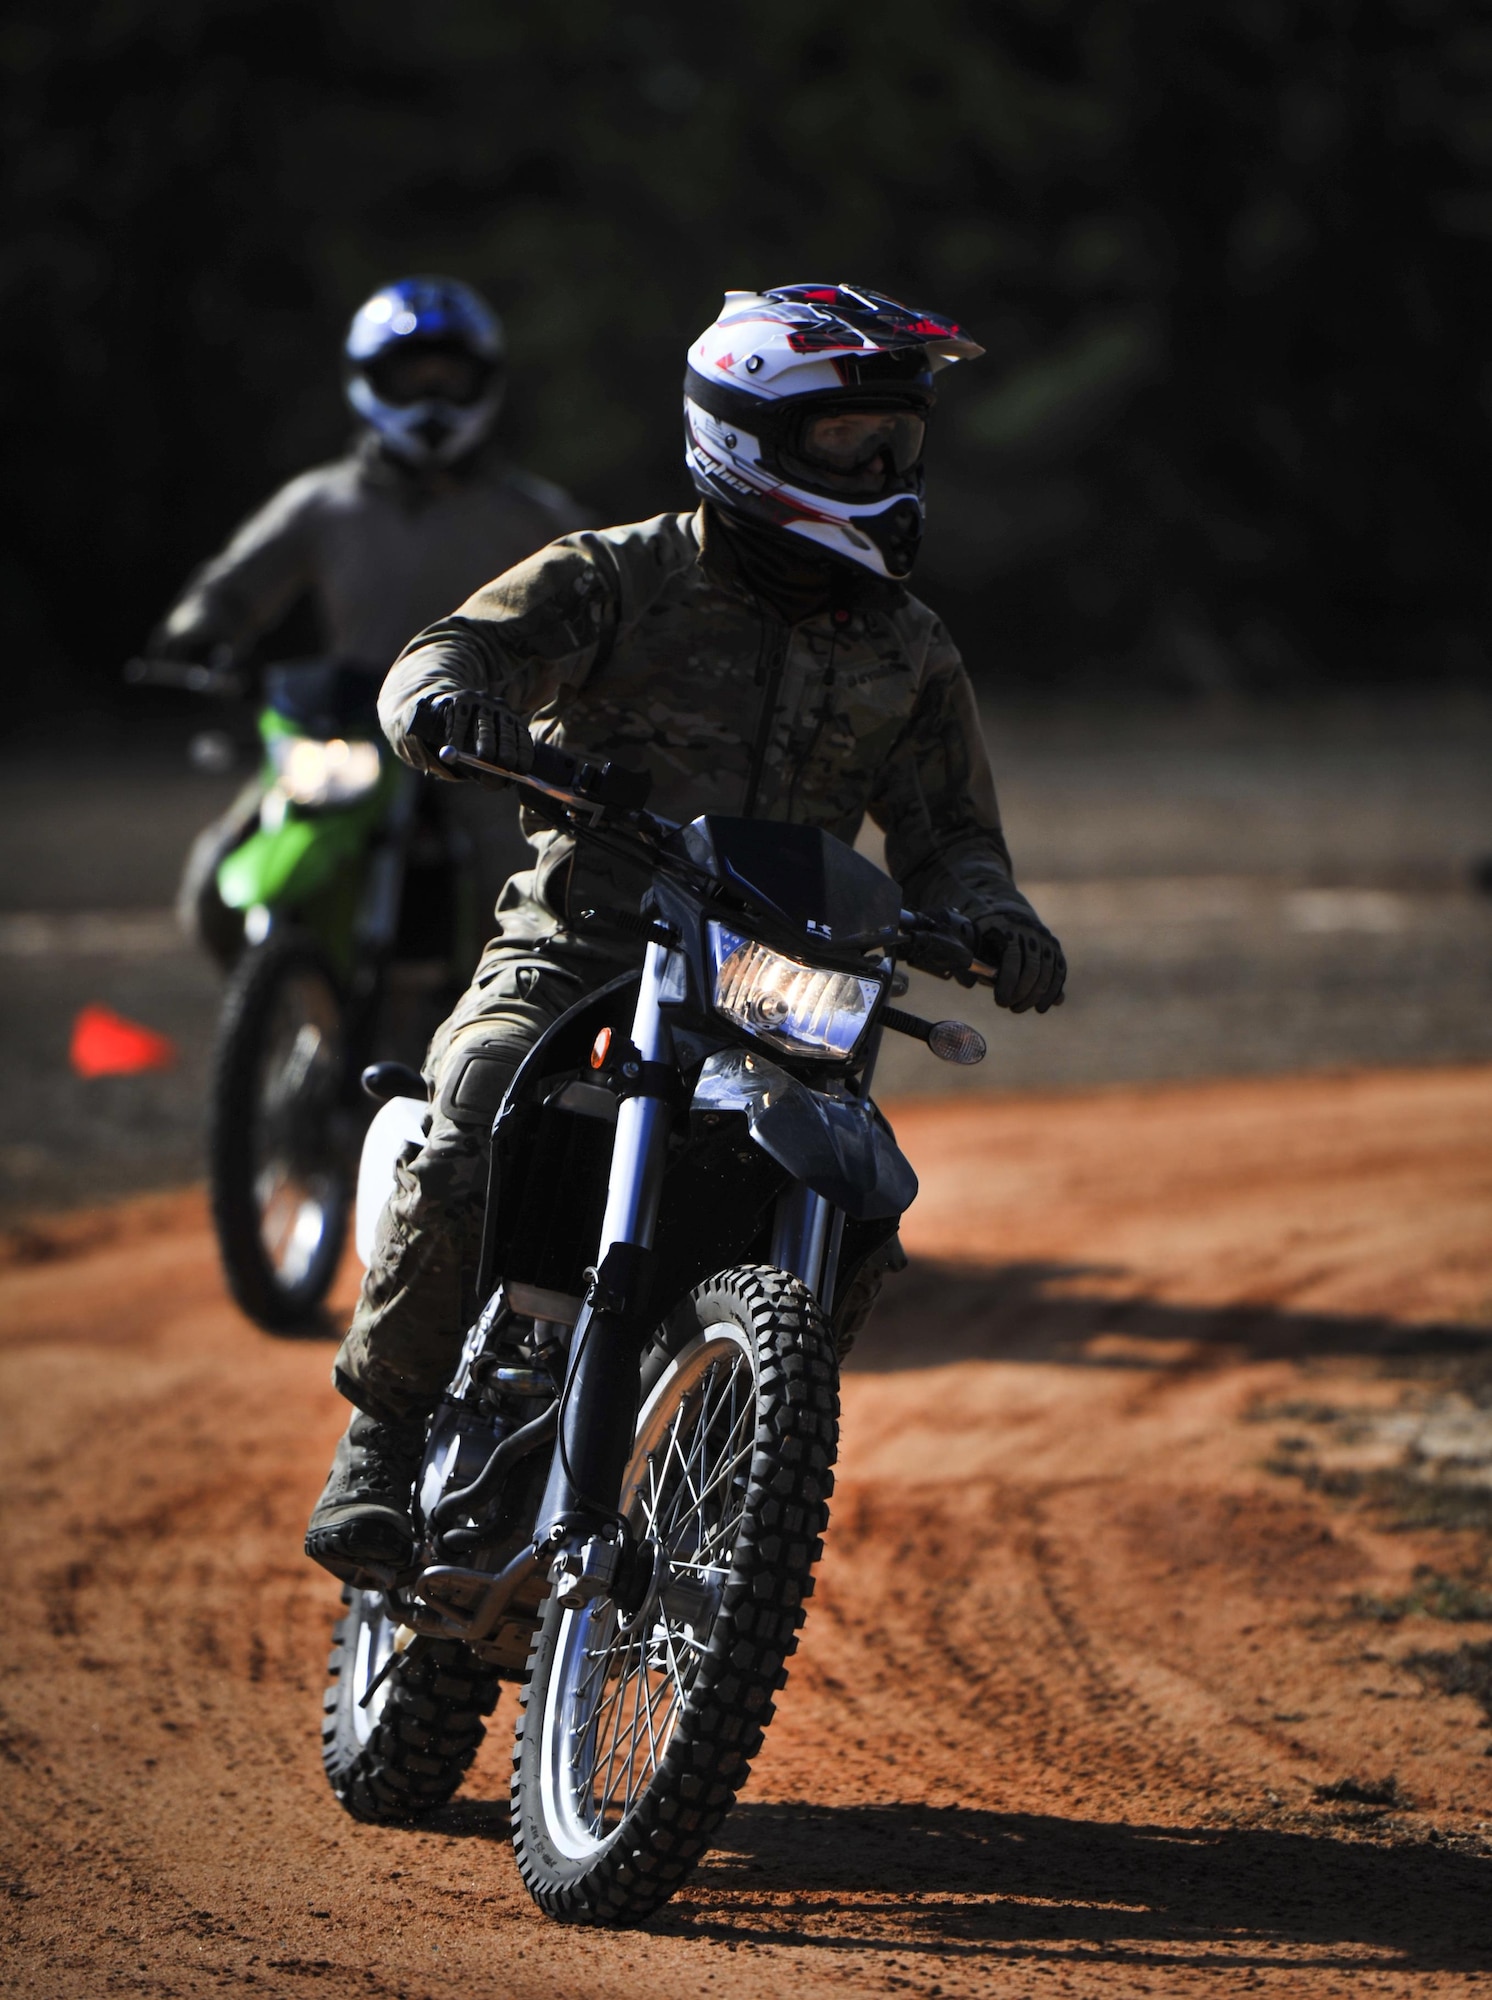 Members from the Special Tactics Training Squadron, 24th Special Operations Wing, Hurlburt Field, Fla., learn how to ride dirt bikes during an advanced tactical vehicle training at Eglin Range, Fla., Feb. 1-4, 2014. The STTS delivers advanced and special tactics skills to a wide variety of joint special operations career fields, including combat controllers and special tactics pararescuemen. (U.S. Air Force photo by Senior Airman Christopher Callaway/Released)